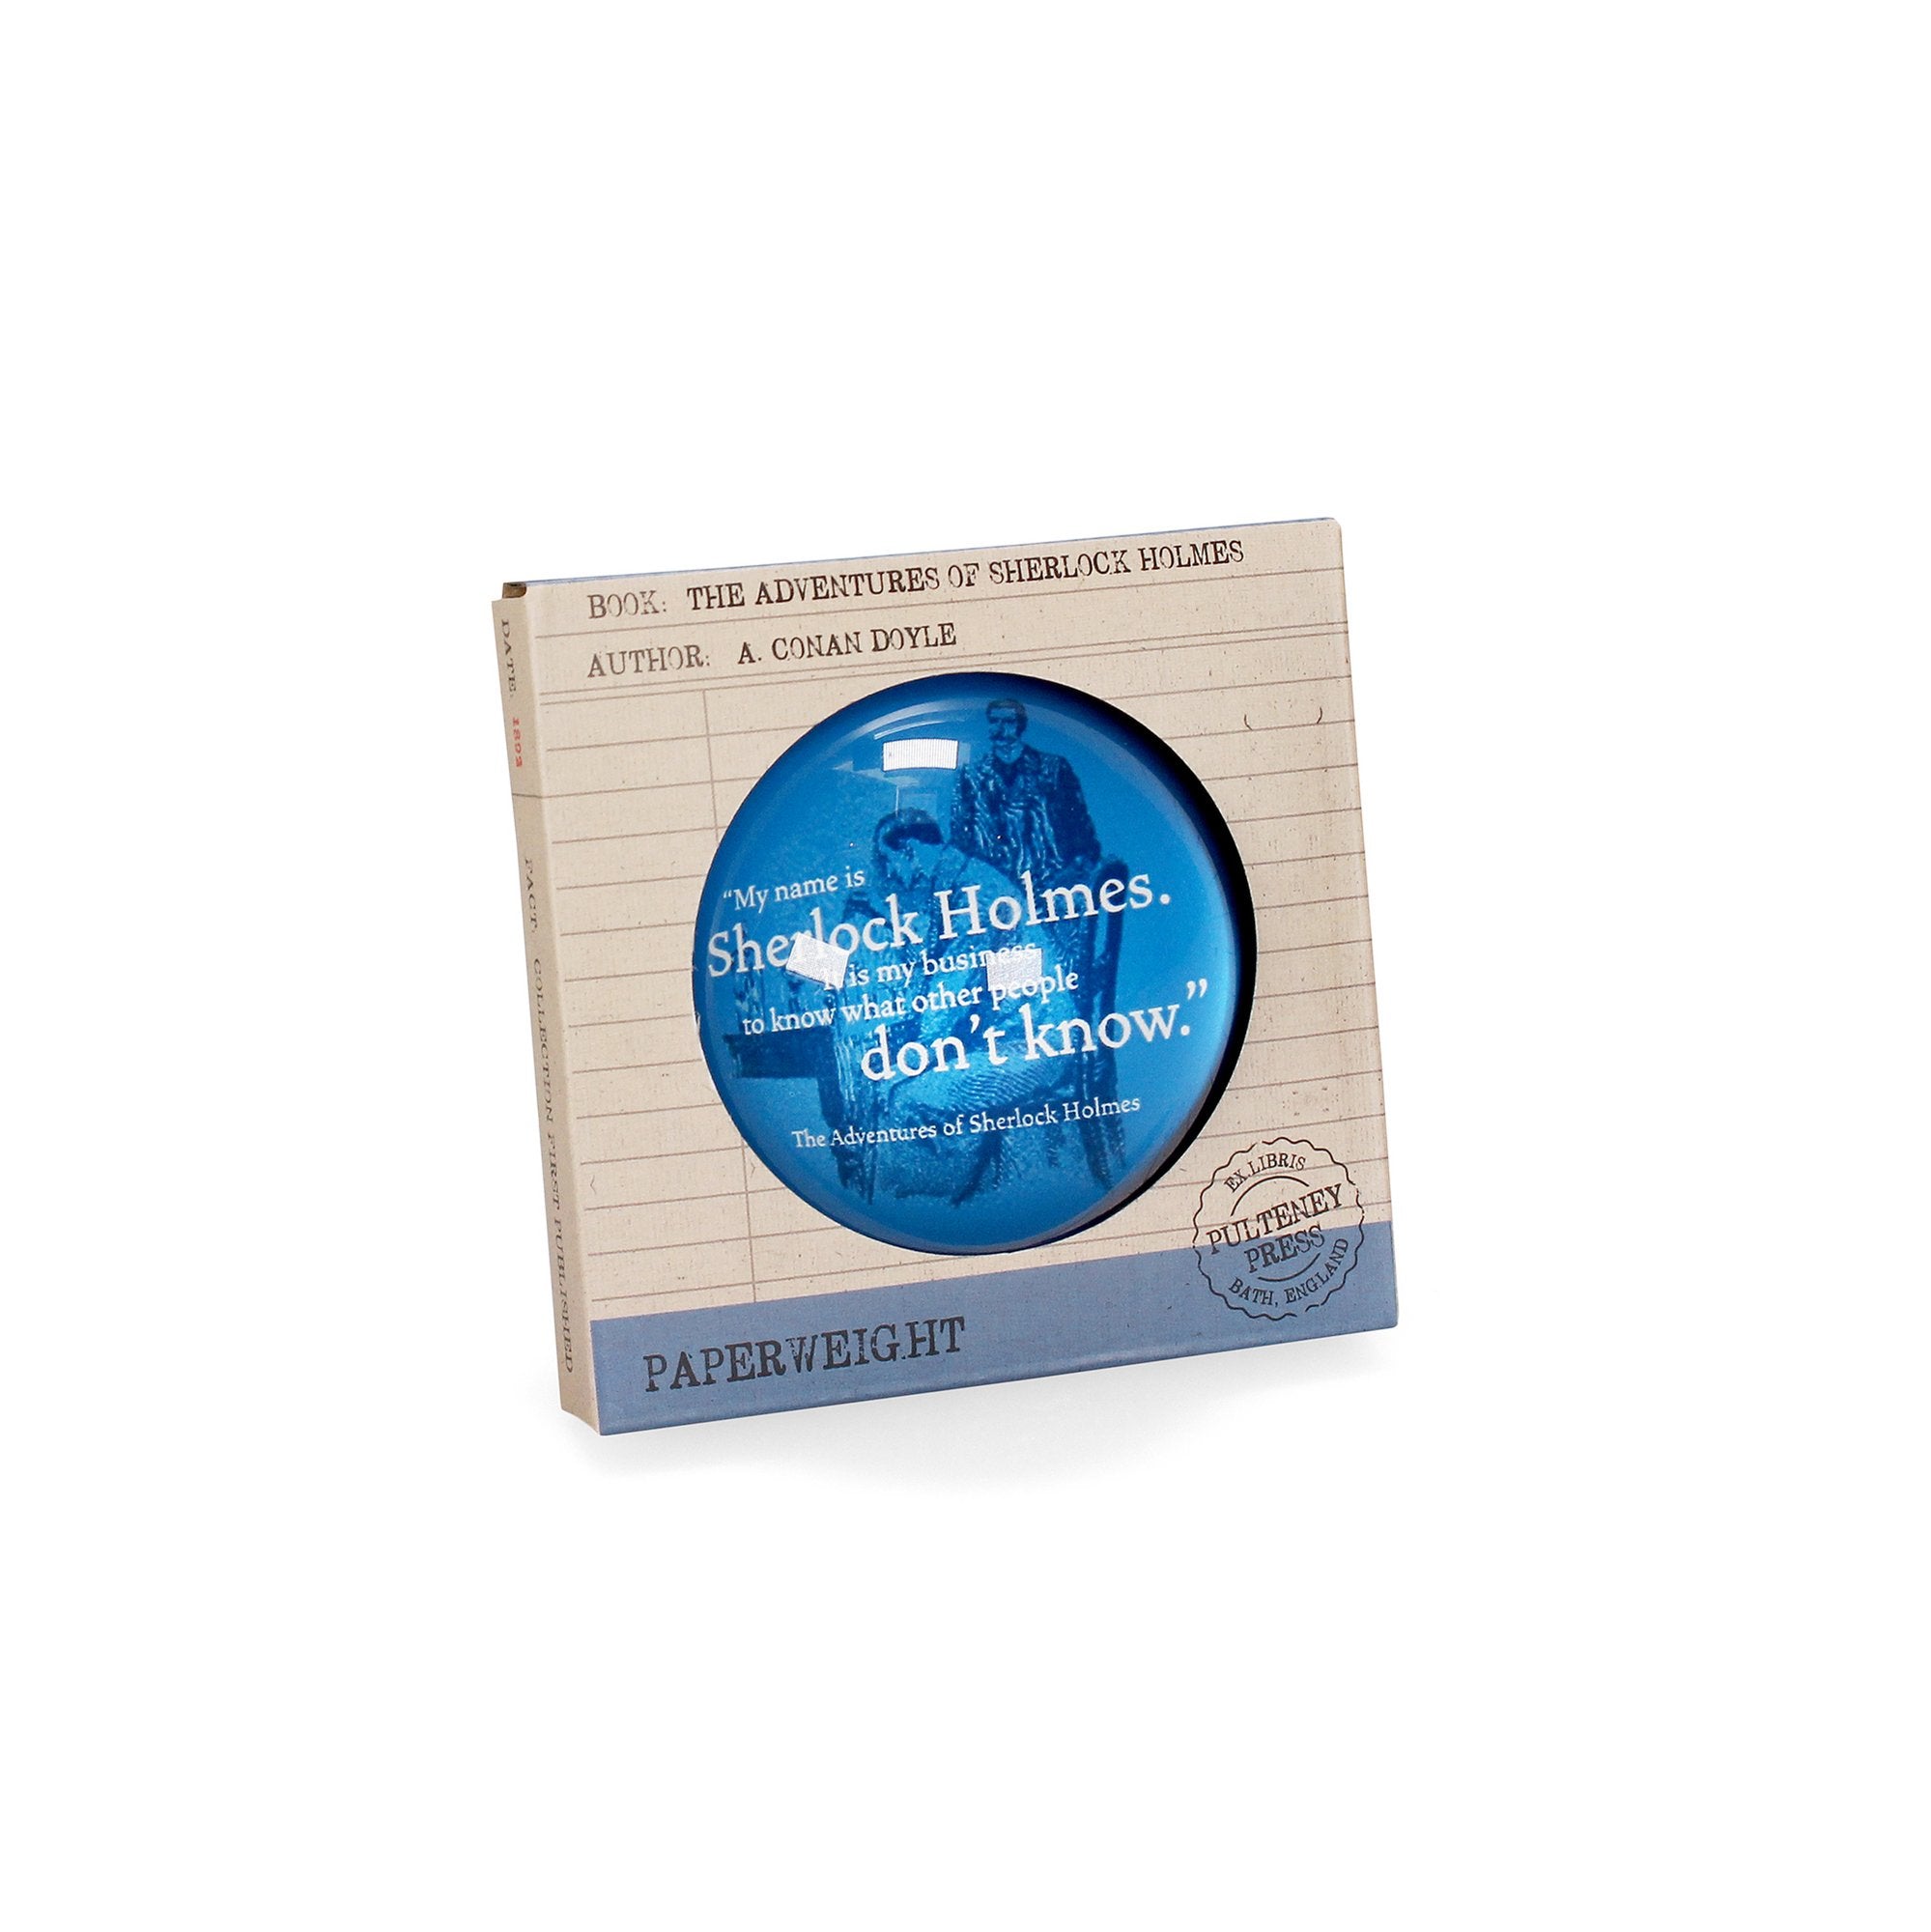 Paperweight Boxed (70mm) - Pulteney Press (Sherlock Holmes)